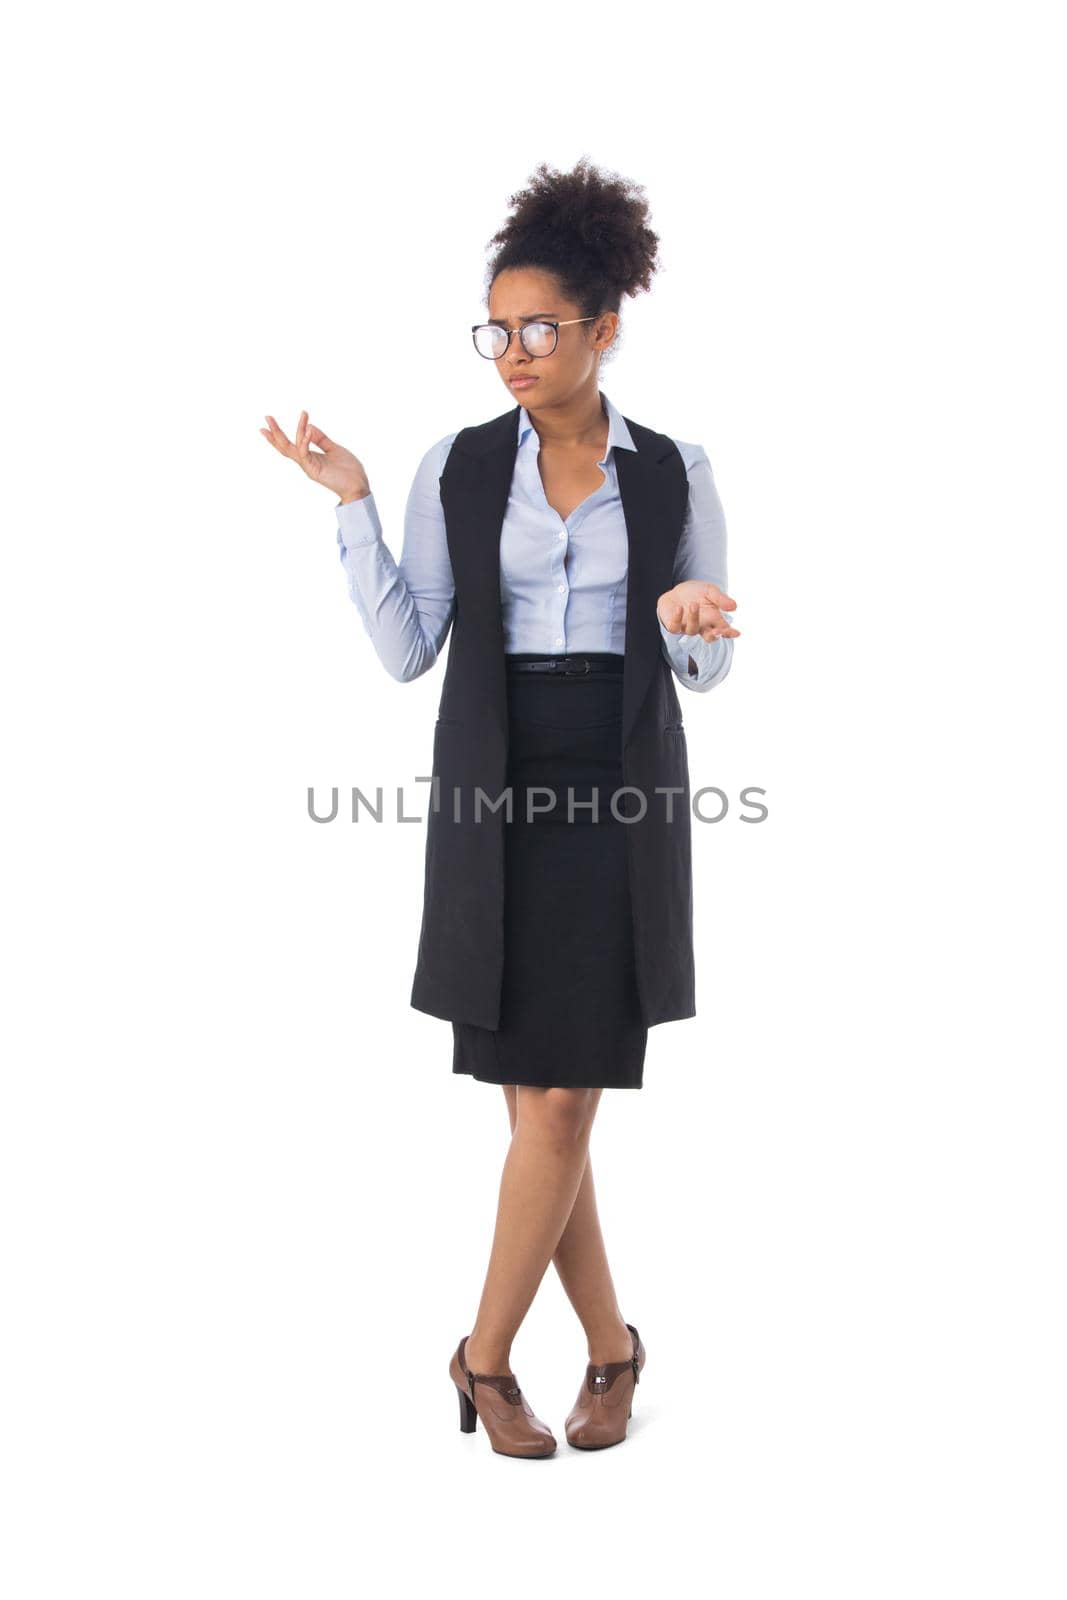 Clueless African businesswoman by ALotOfPeople